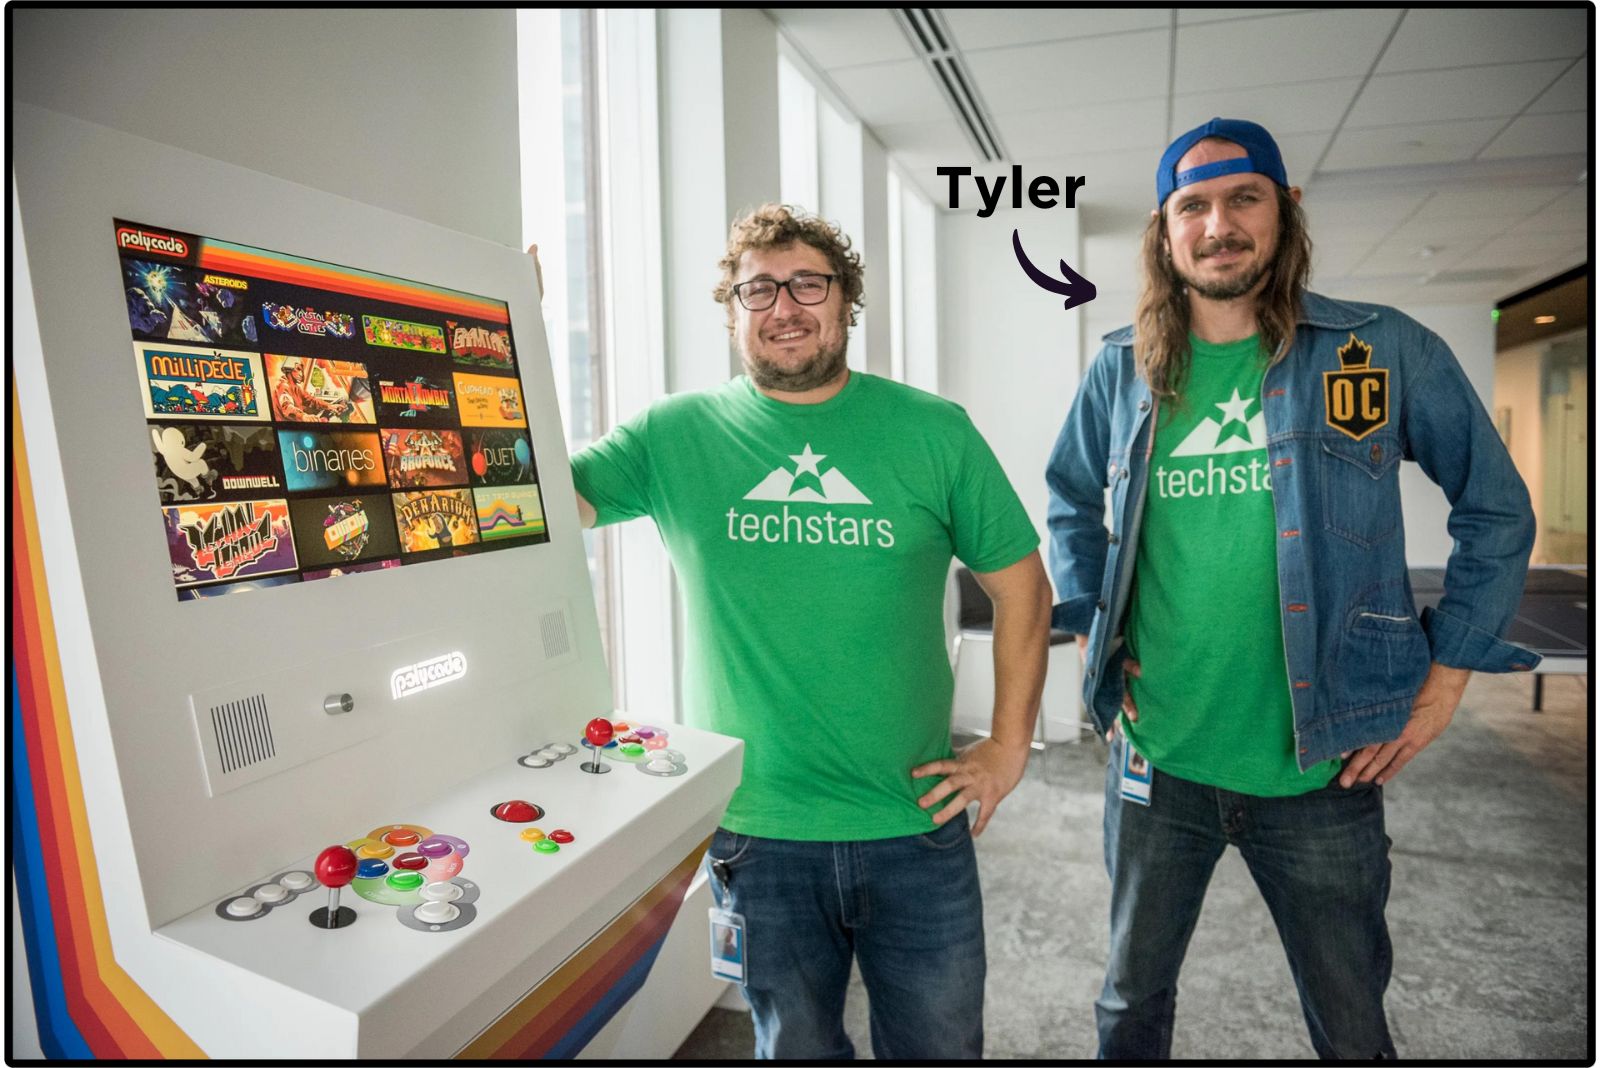 Tyler Bushnell from Polycade